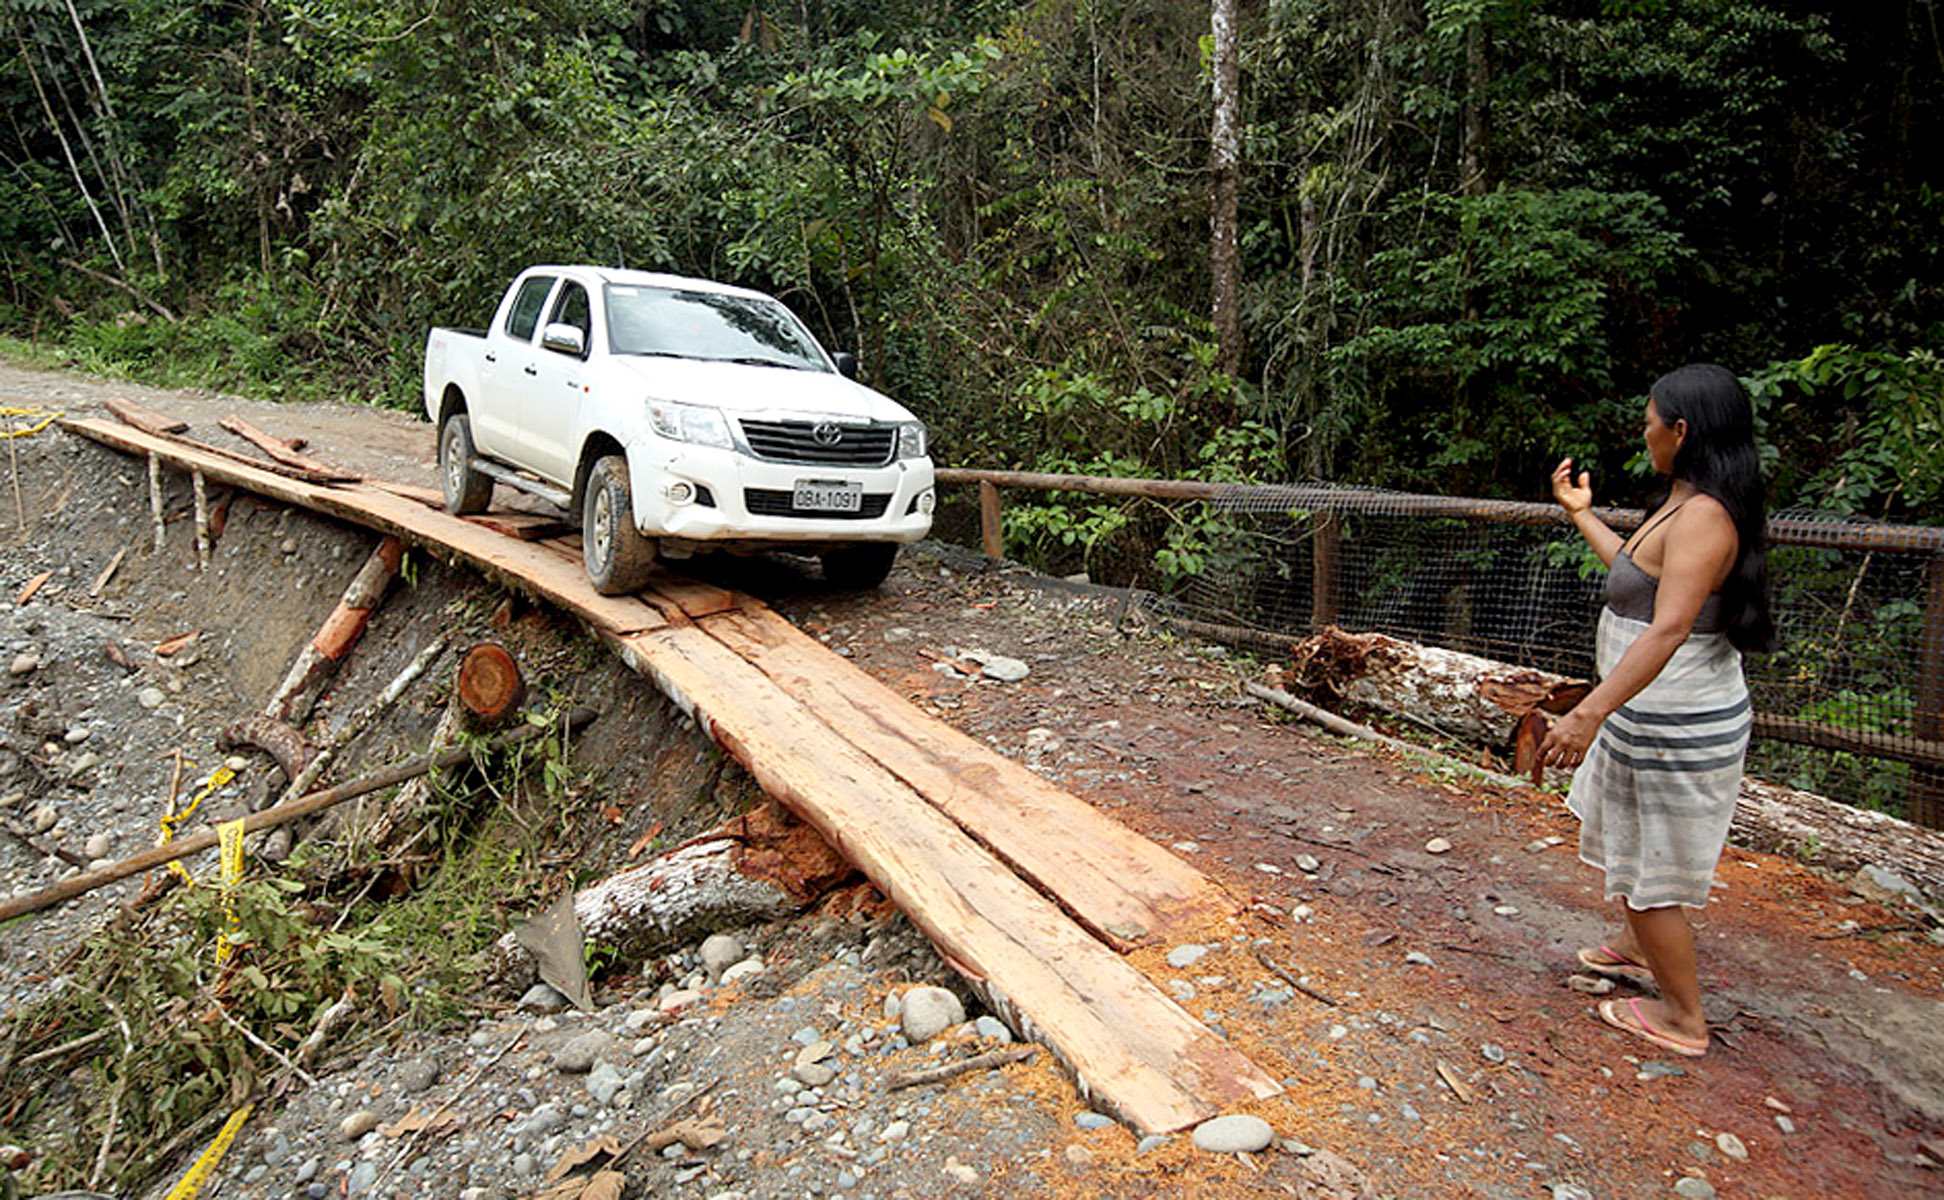 A local resident helps guide a vehicle across a precarious road partially washed out by constant rains.